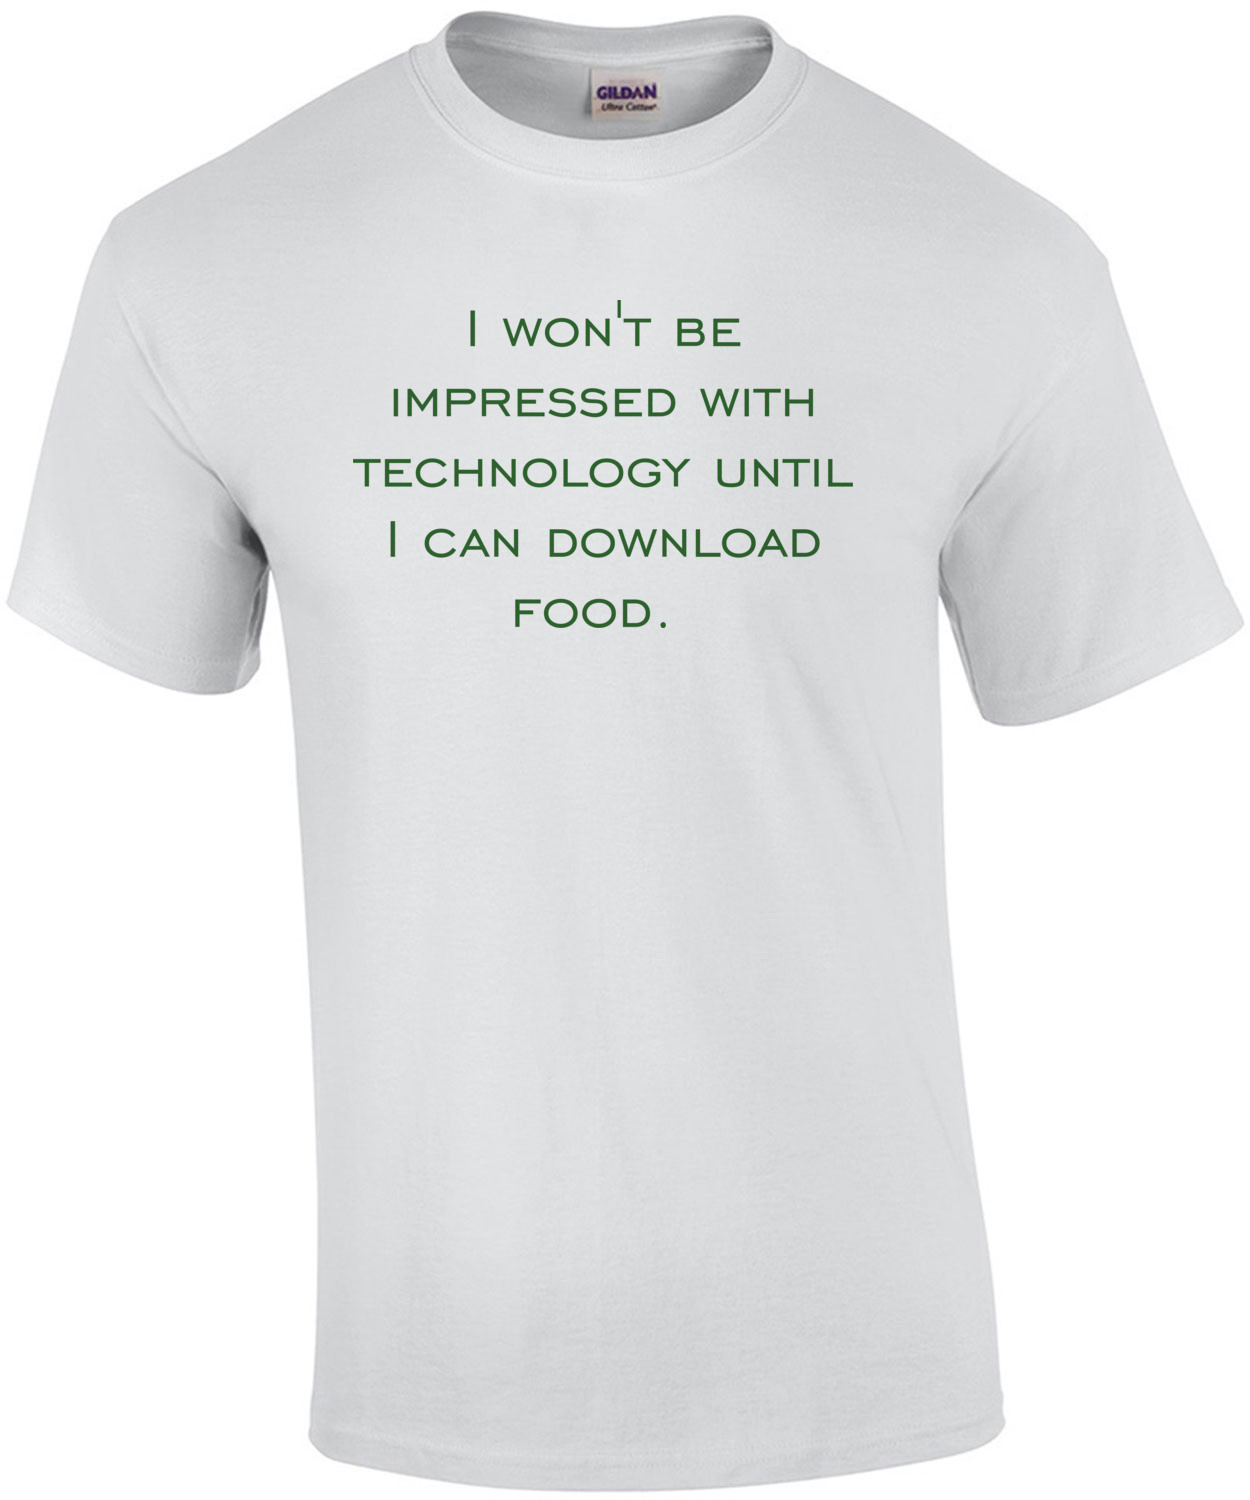 I won't be impressed with technology until I can download food. Funny T-Shirt Shirt